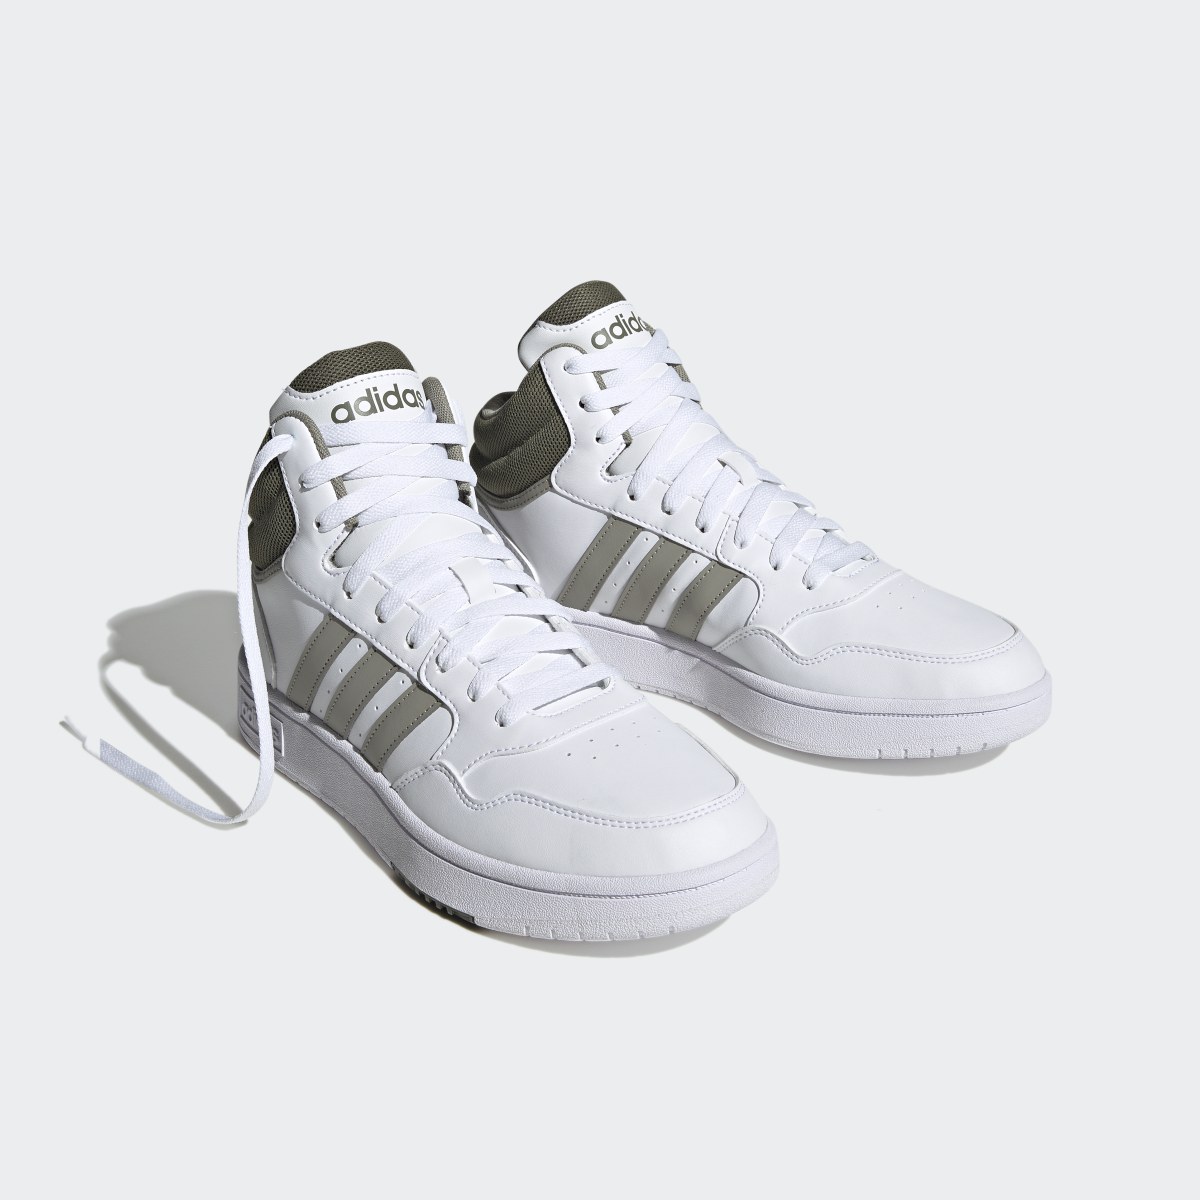 Adidas Hoops 3.0 Mid Lifestyle Basketball Classic Vintage Shoes. 5